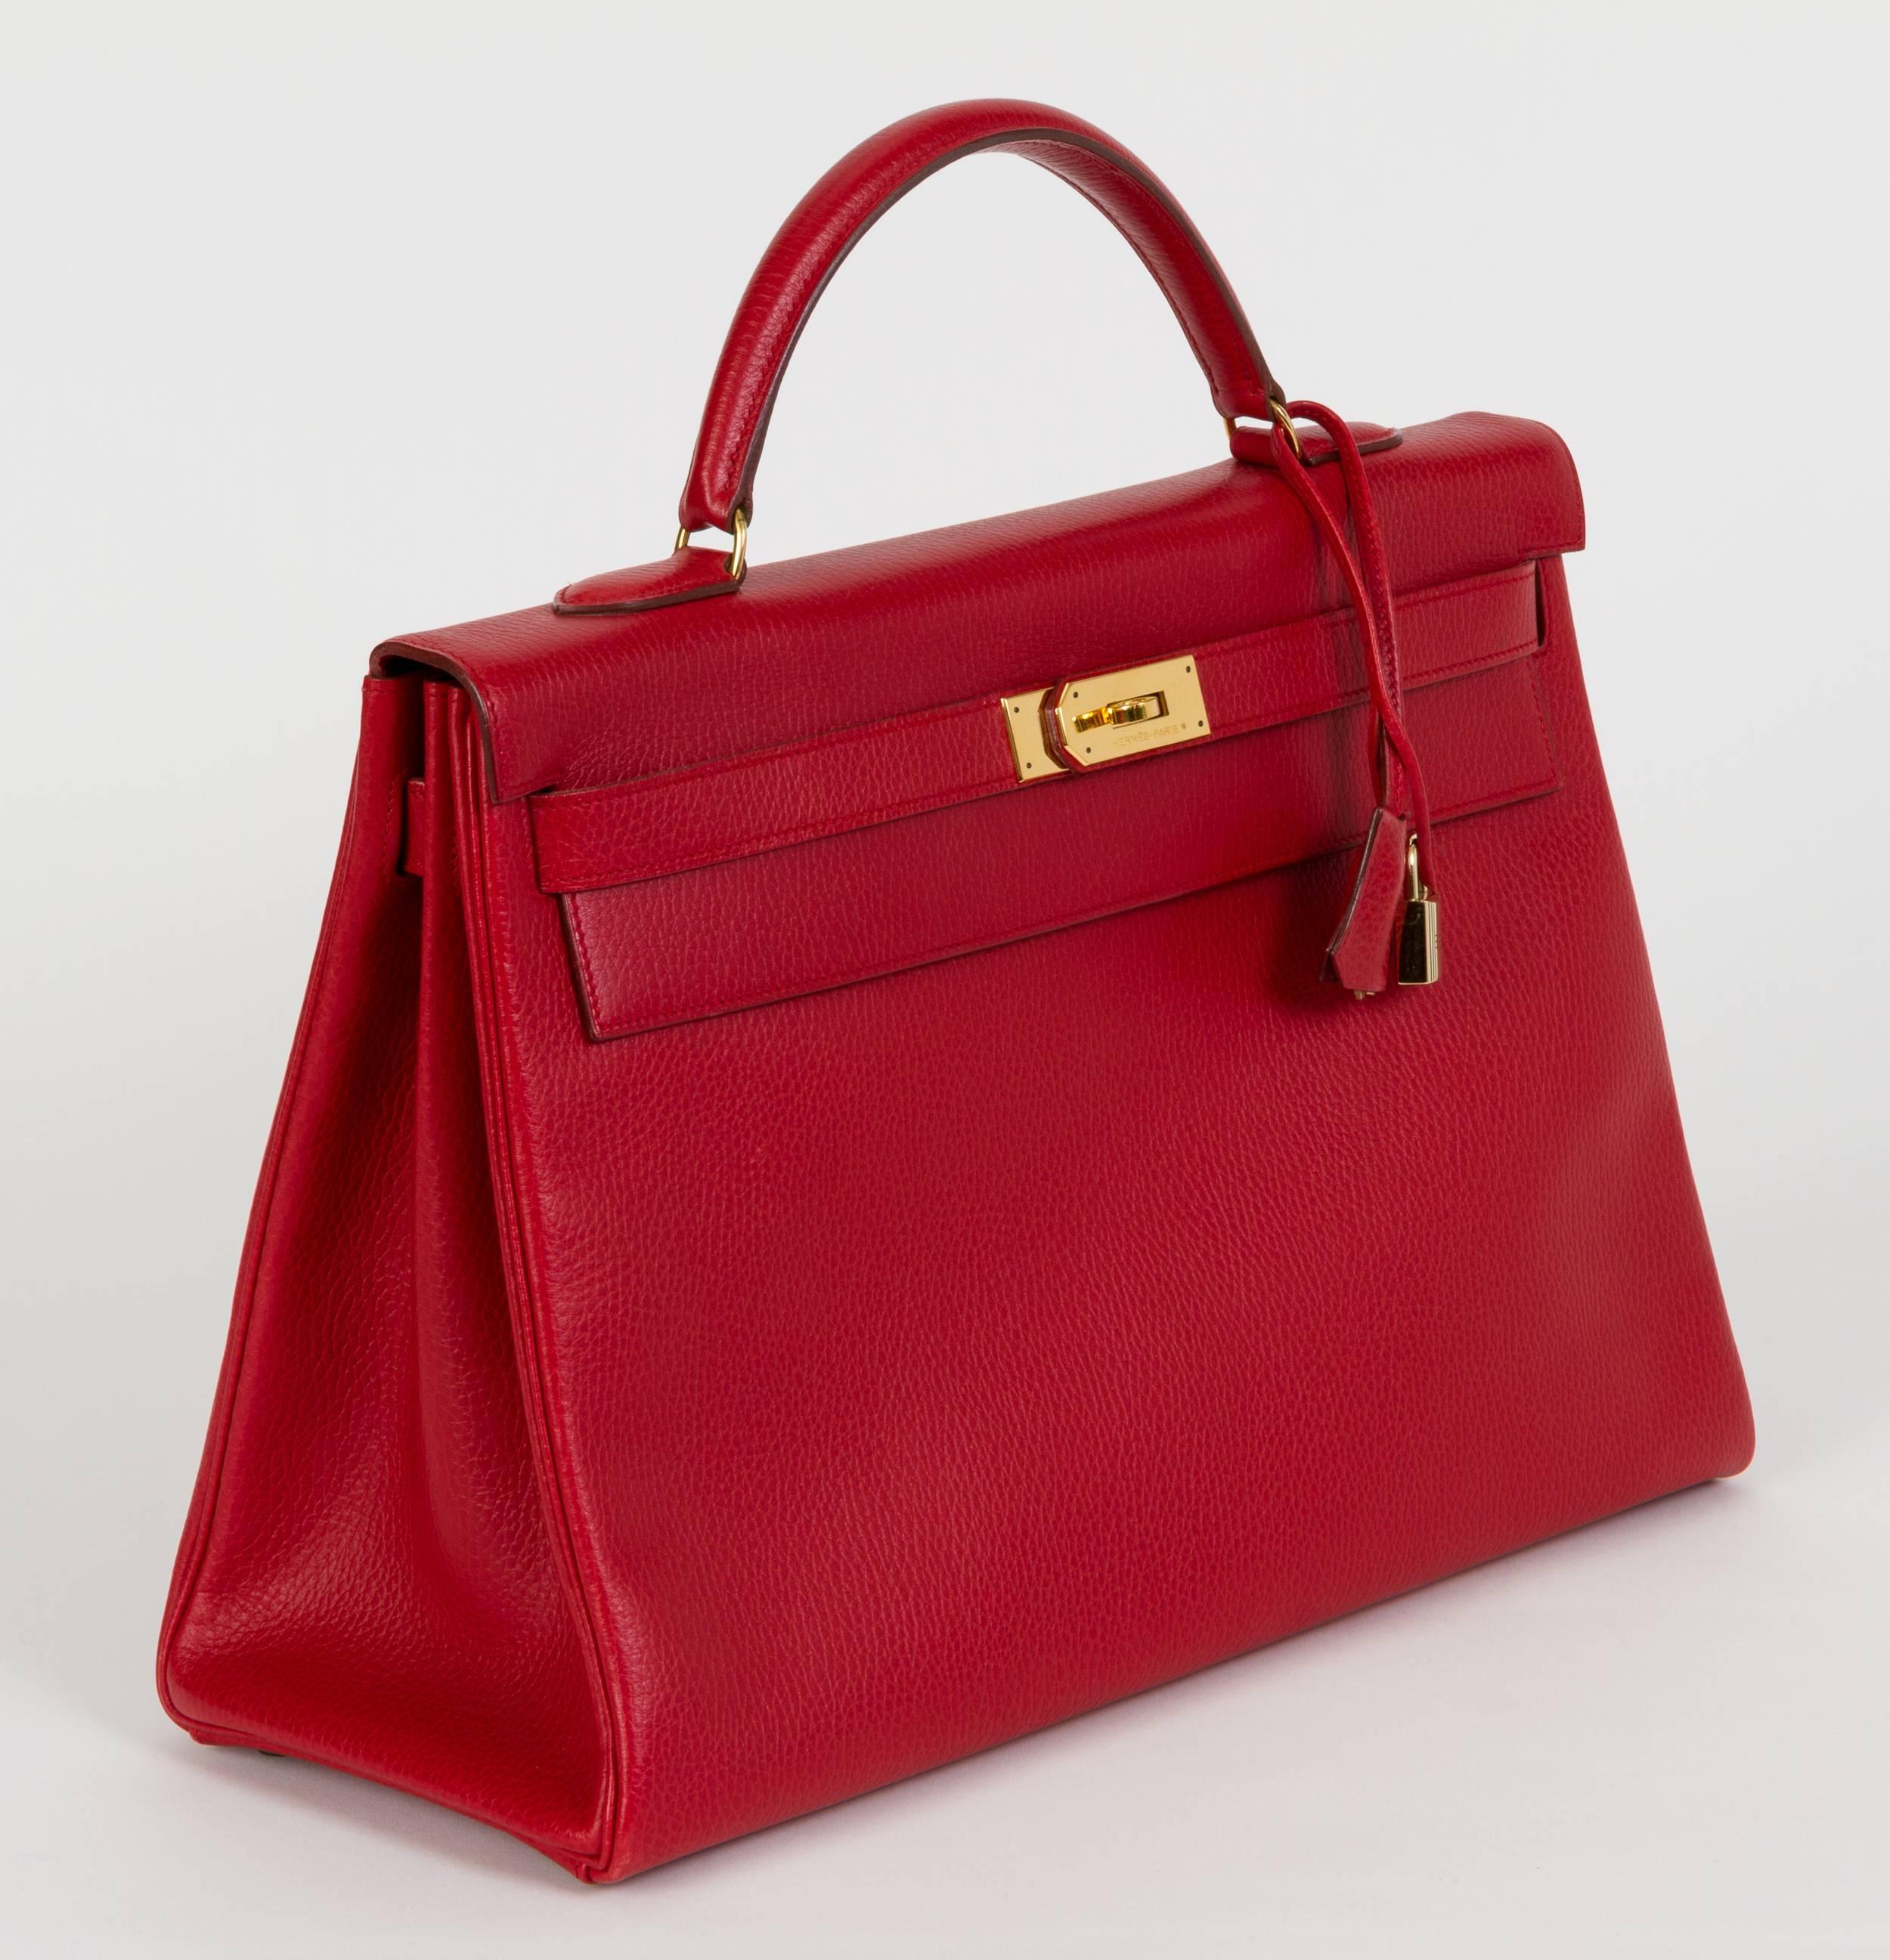 Hermès 40cm Kelly bag in red Ardenne leather and goldtone hardware. Handle drop, 4.